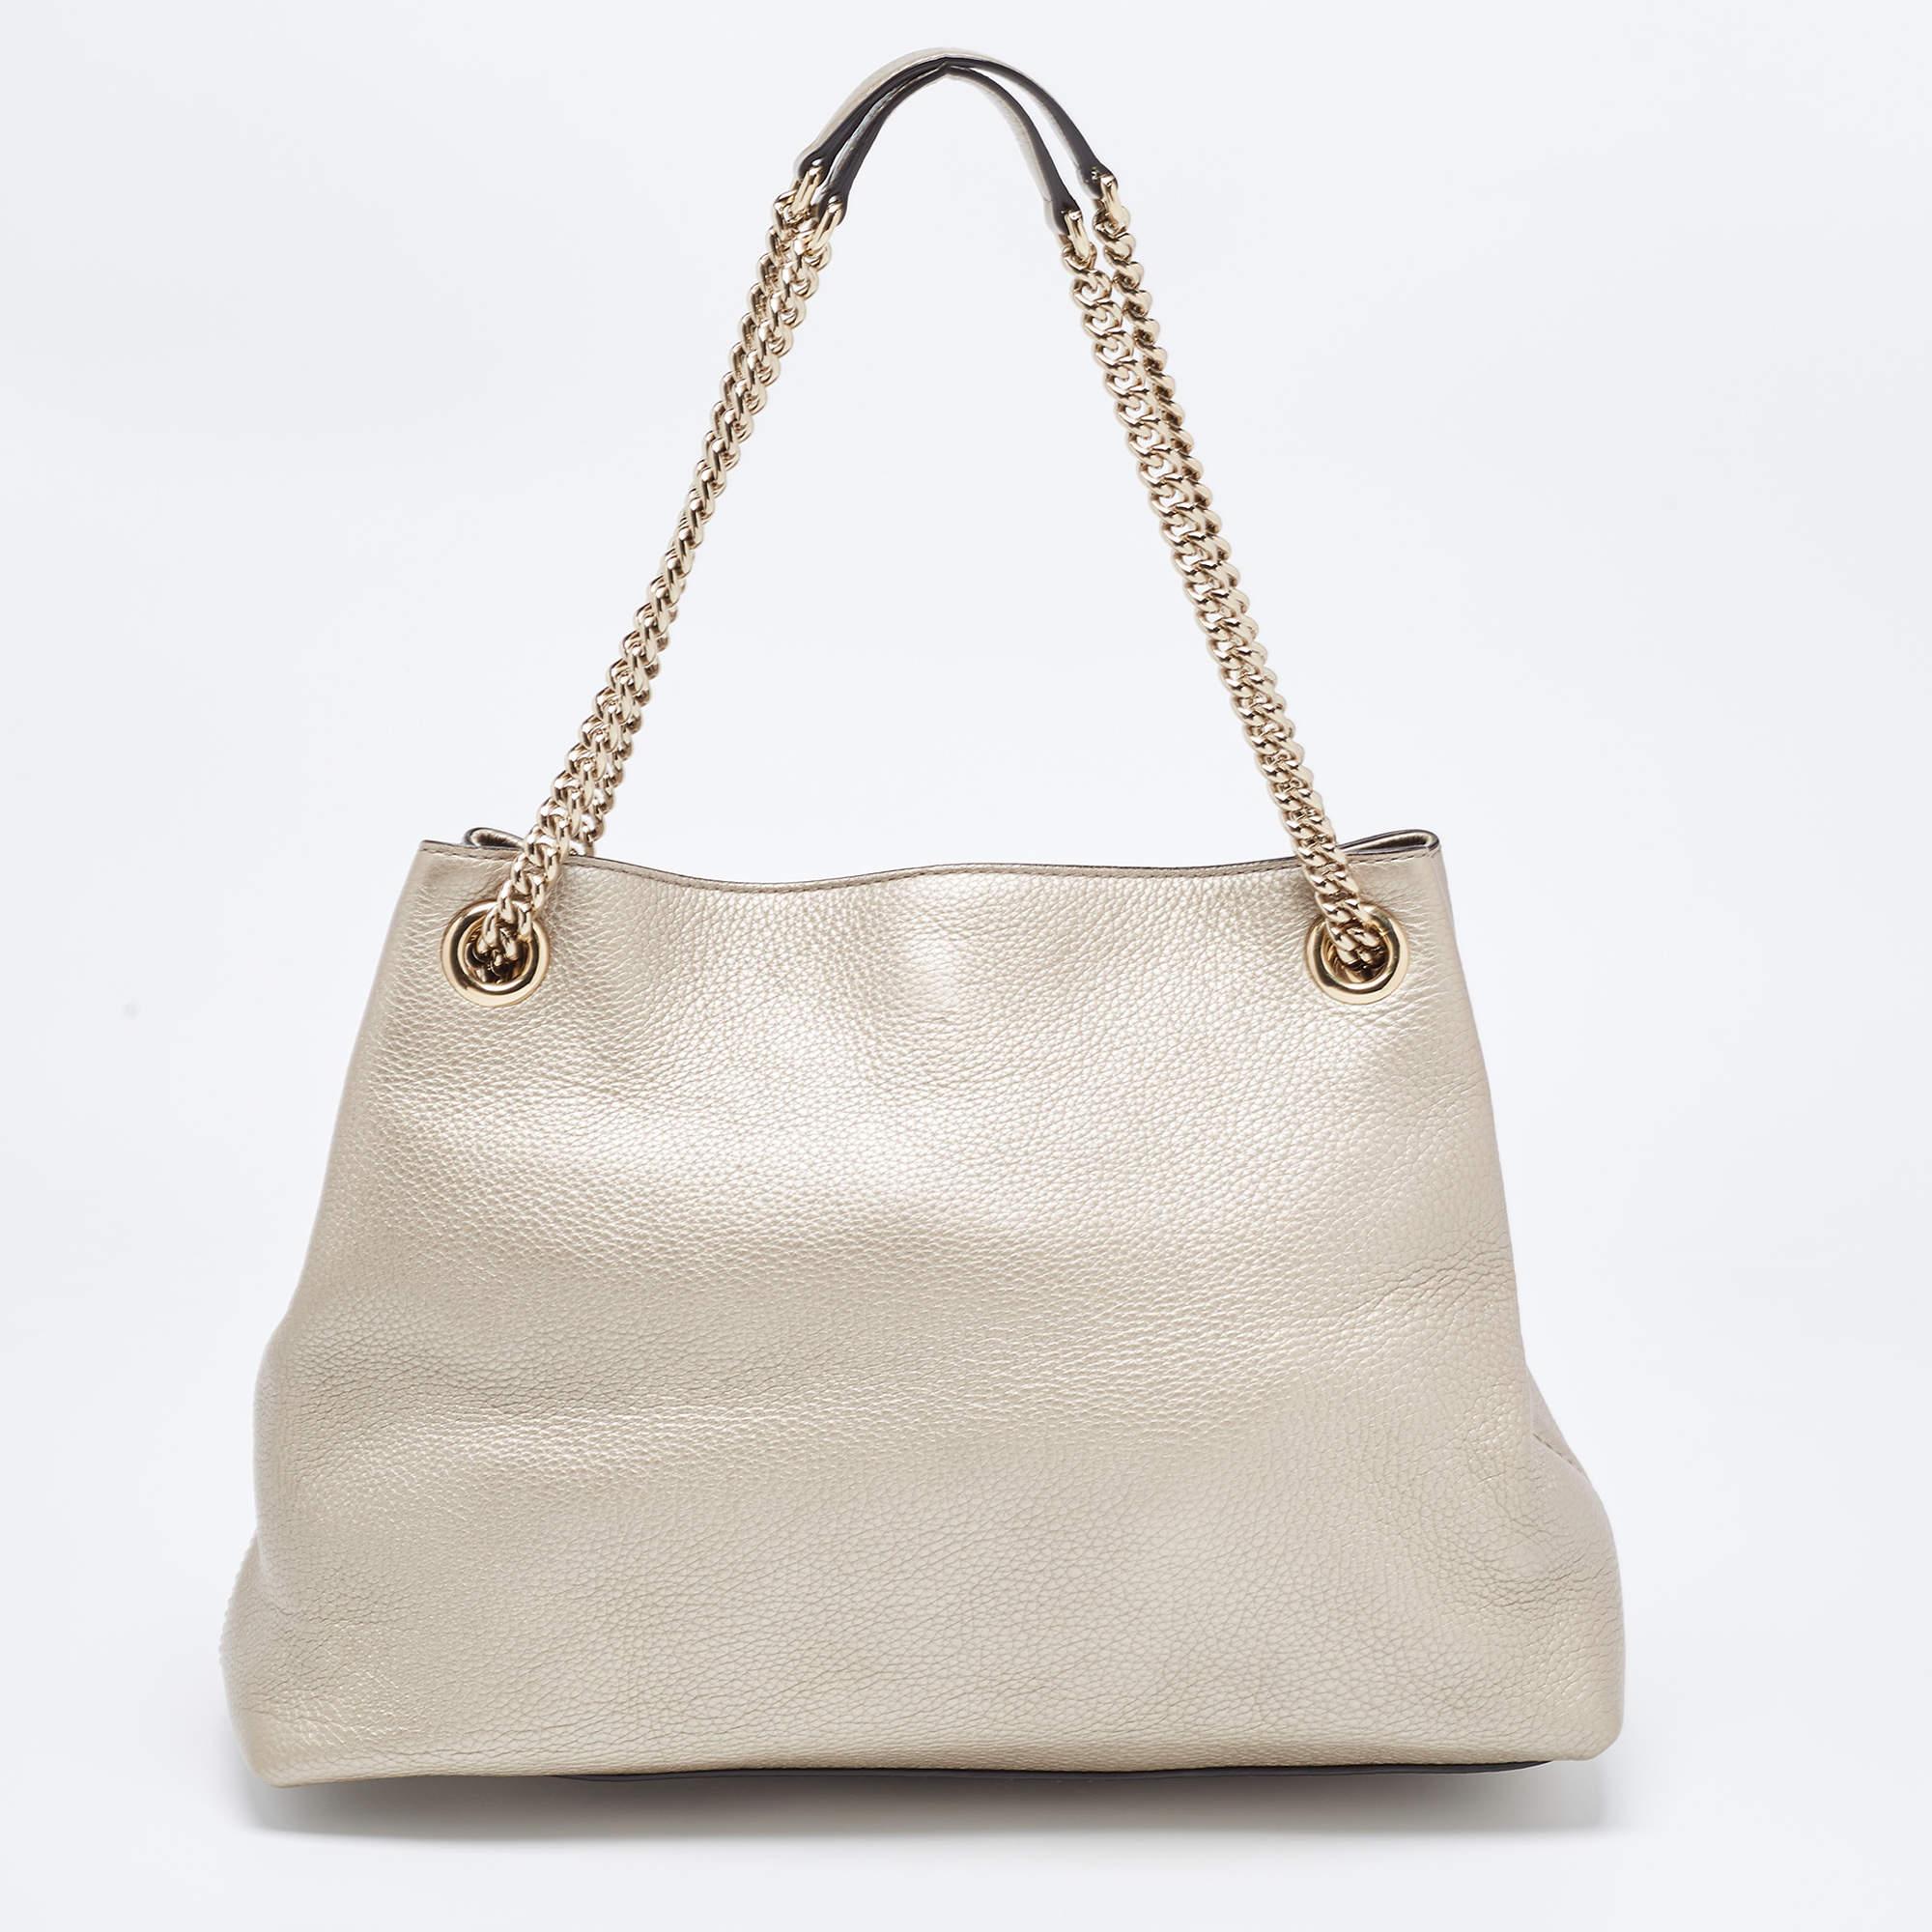 Women's Gucci Pale Gold Leather Medium Soho Chain Tote